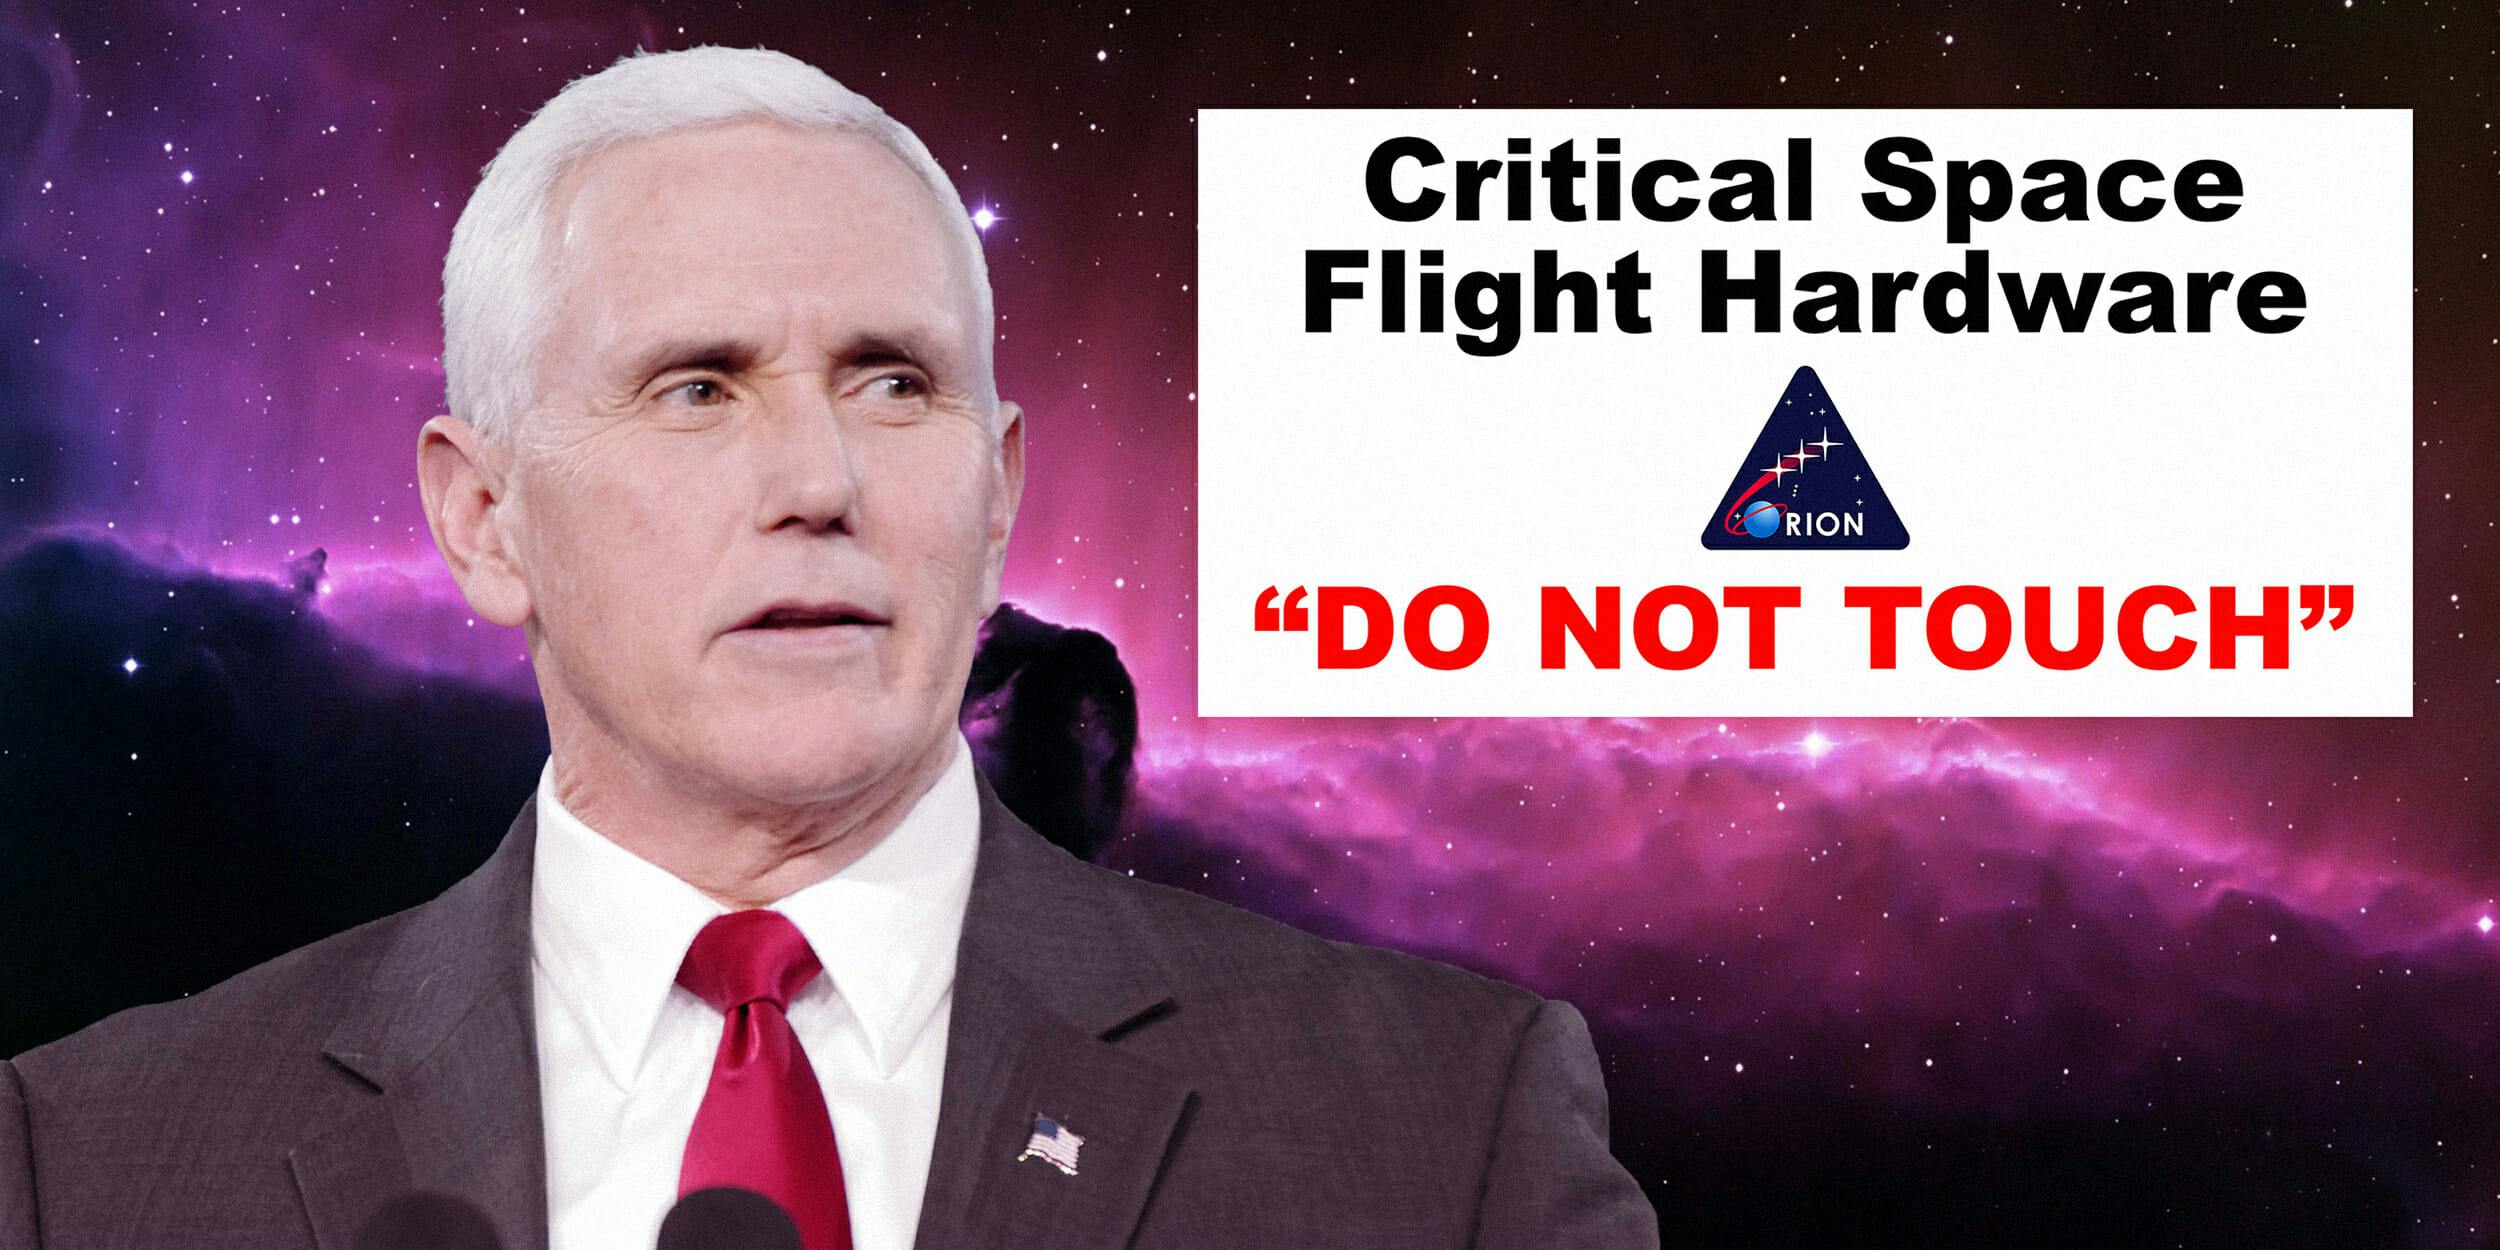 Mike Pence in space with "Critical Space Flight Hardware 'Do Not Touch'" sign